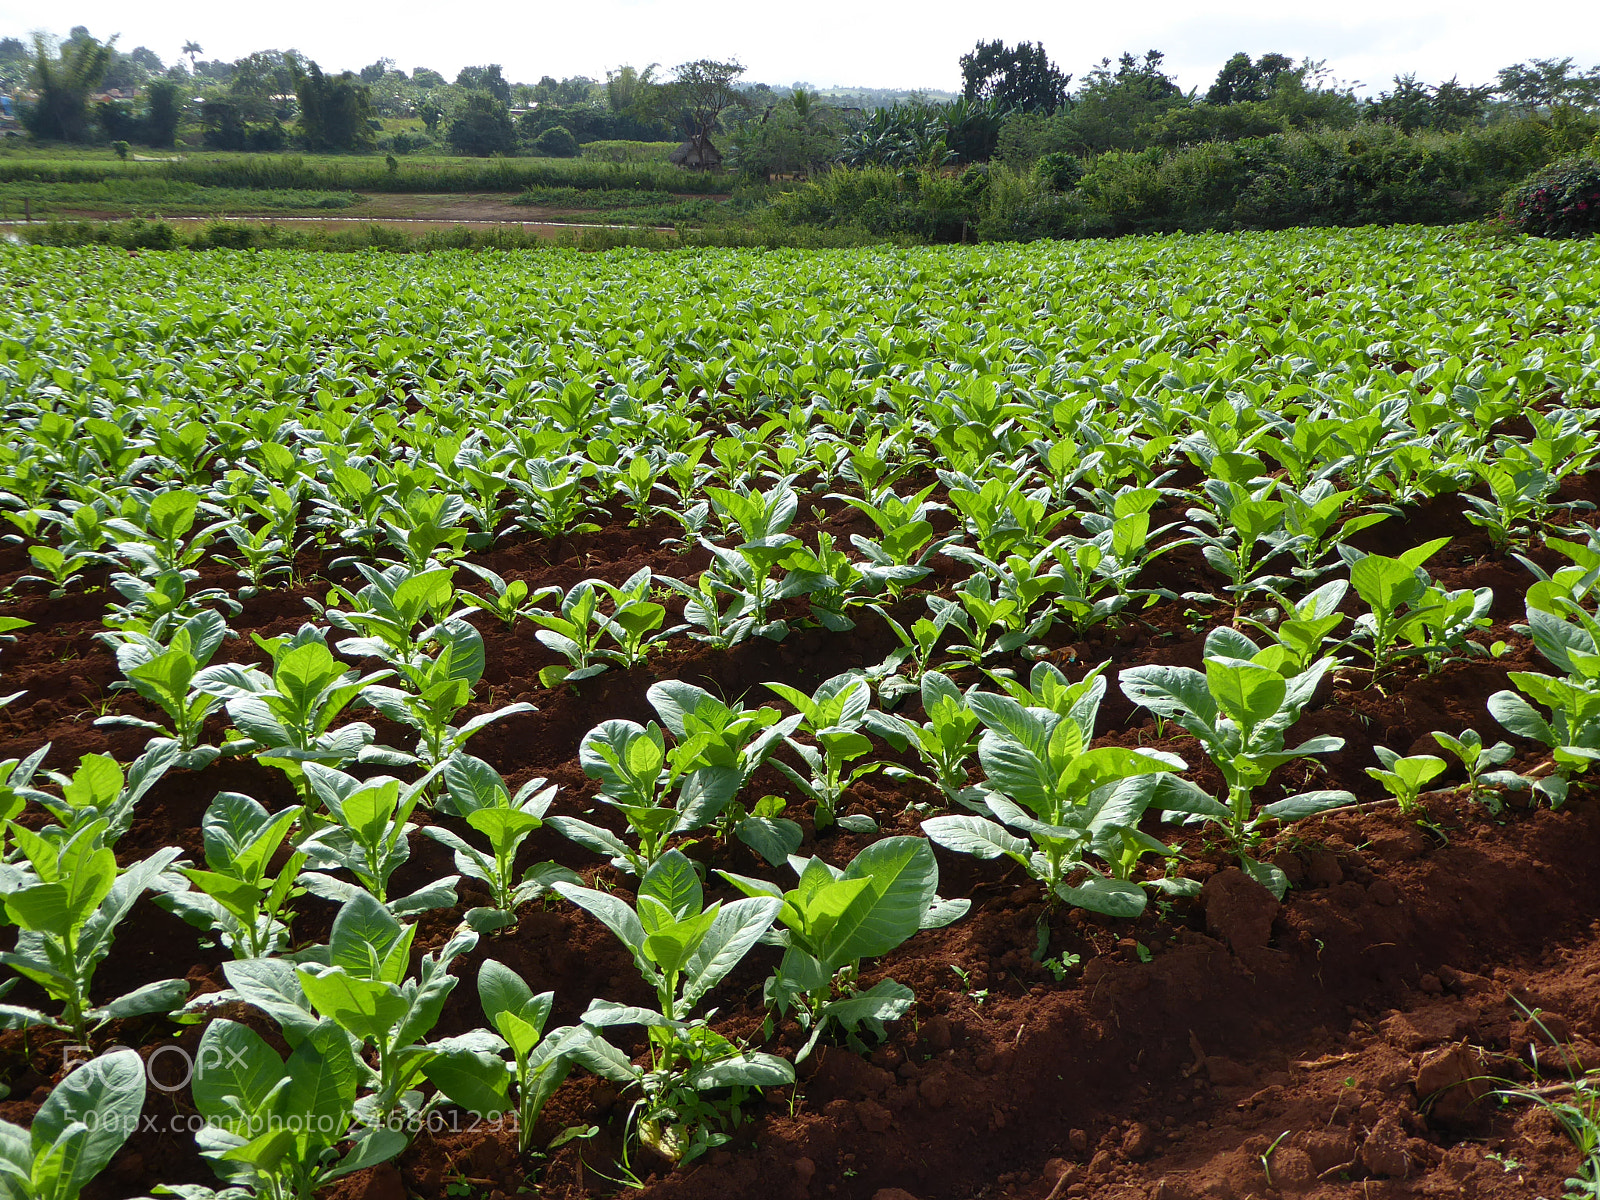 Panasonic DMC-TZ71 sample photo. Cultivated tobacco field in photography